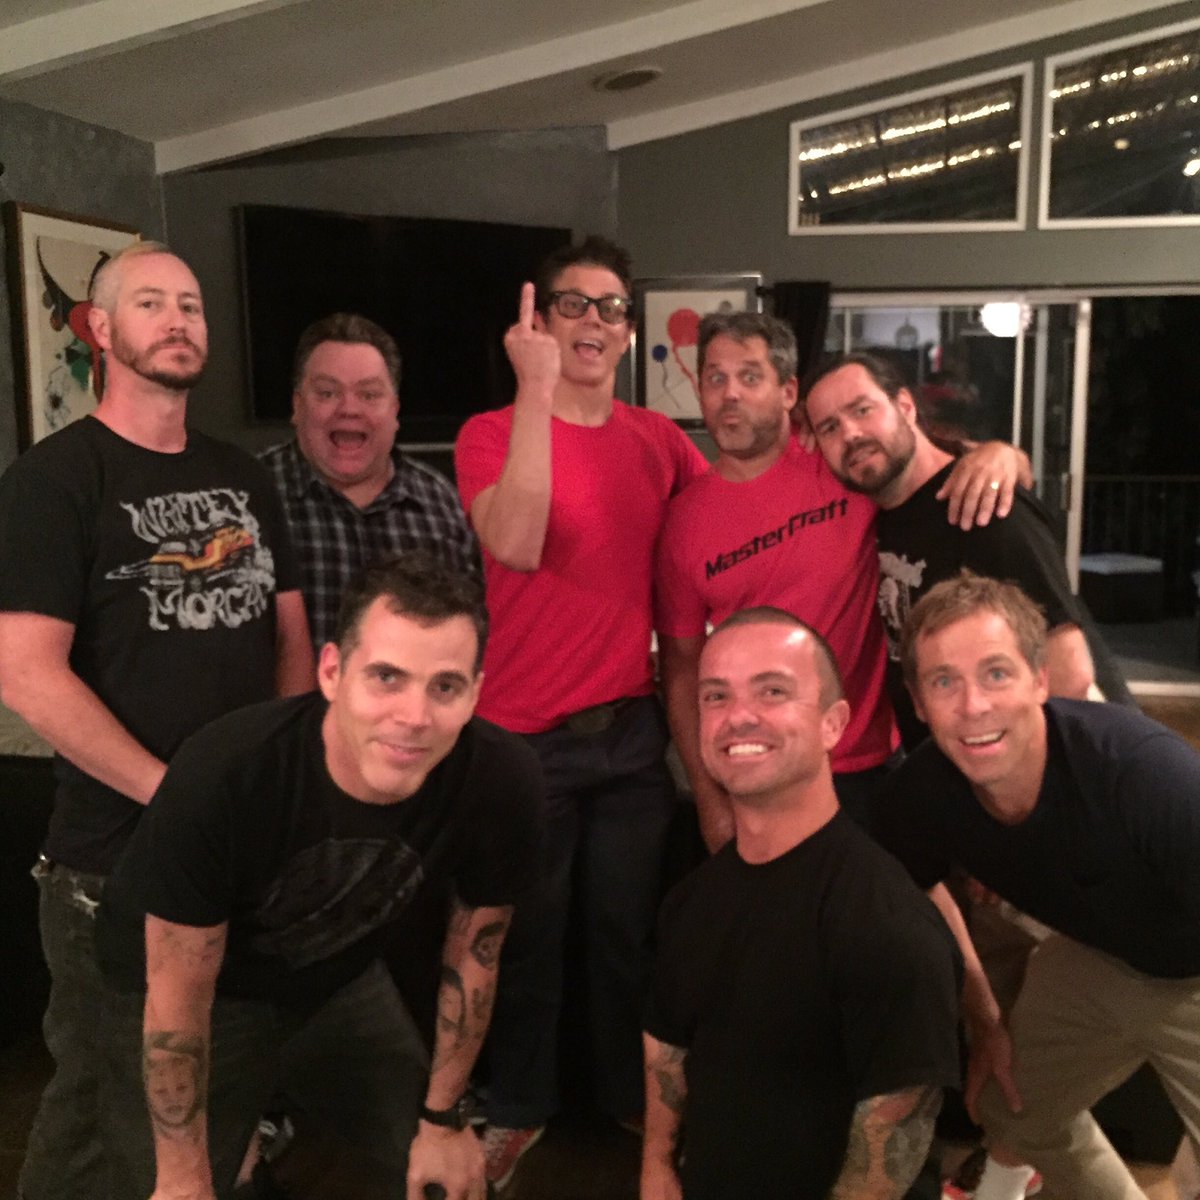 Me and the boys at Steve O's house tonight. First time in a long time. Too bad Bam is in Sweden, he was missed.❤️❤️ https://t.co/migRurXJXR